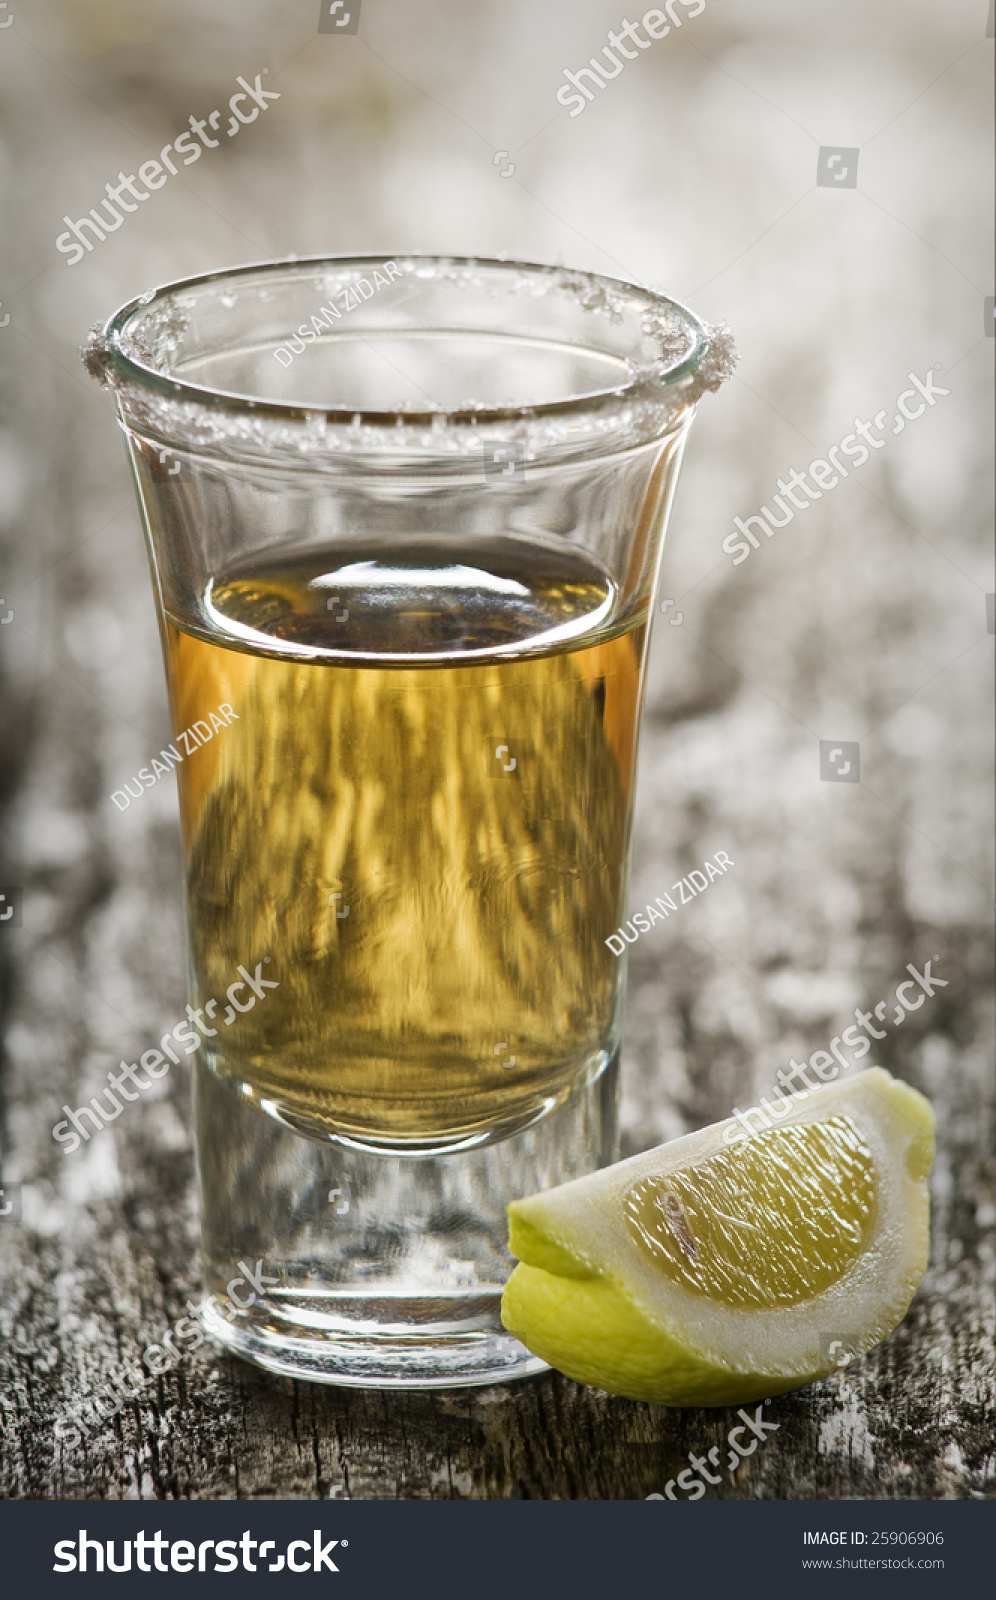 Tequila Shot, With Lemon And Salt Close Up Stock Photo ...